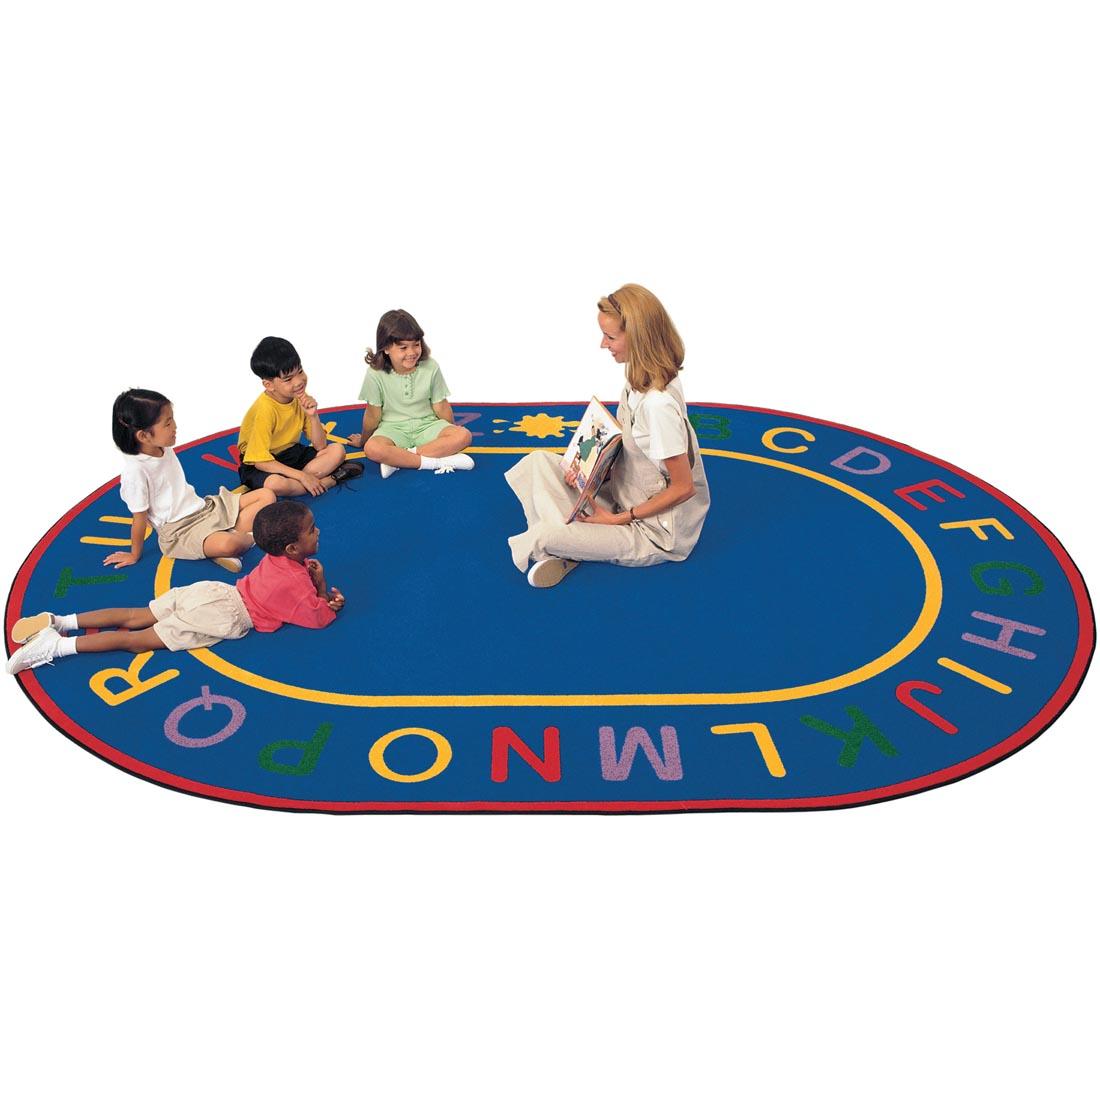 Teacher and students on the Oval Alphabet Rug by Carpets For Kids